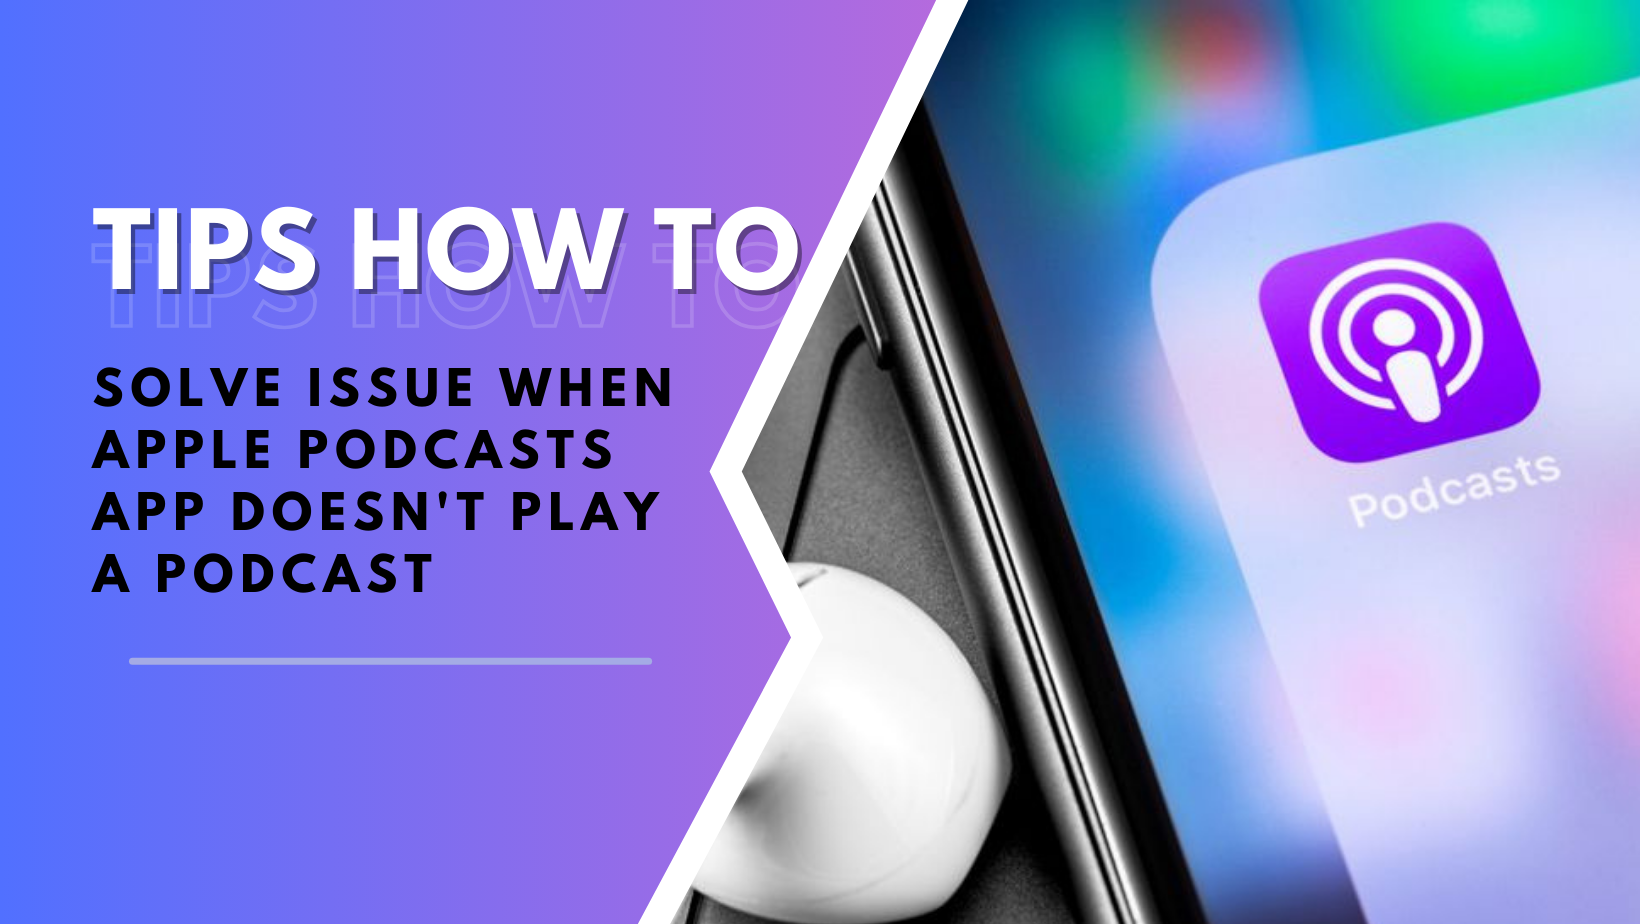 Solve Issue When Apple Podcasts App Doesn’t Play a Podcast